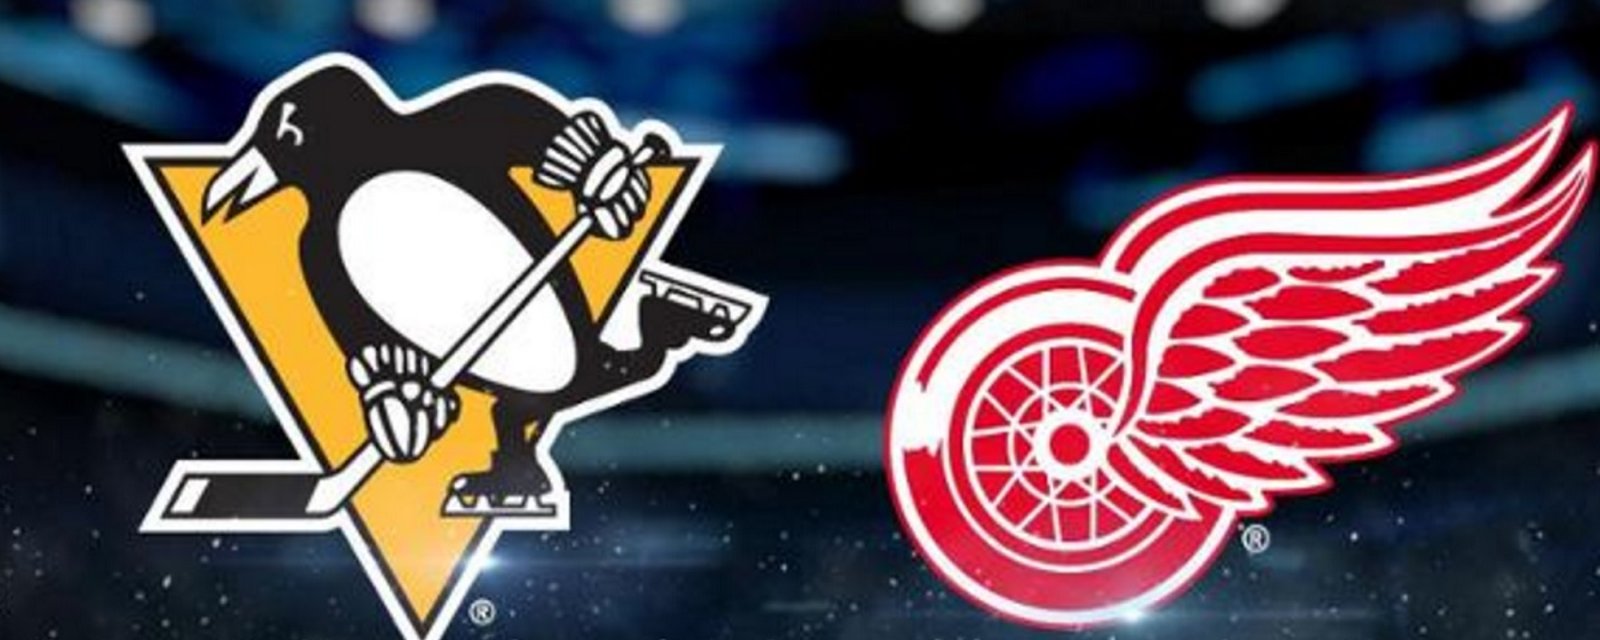 Rumors of a potential trade between the Penguins and Red Wings.